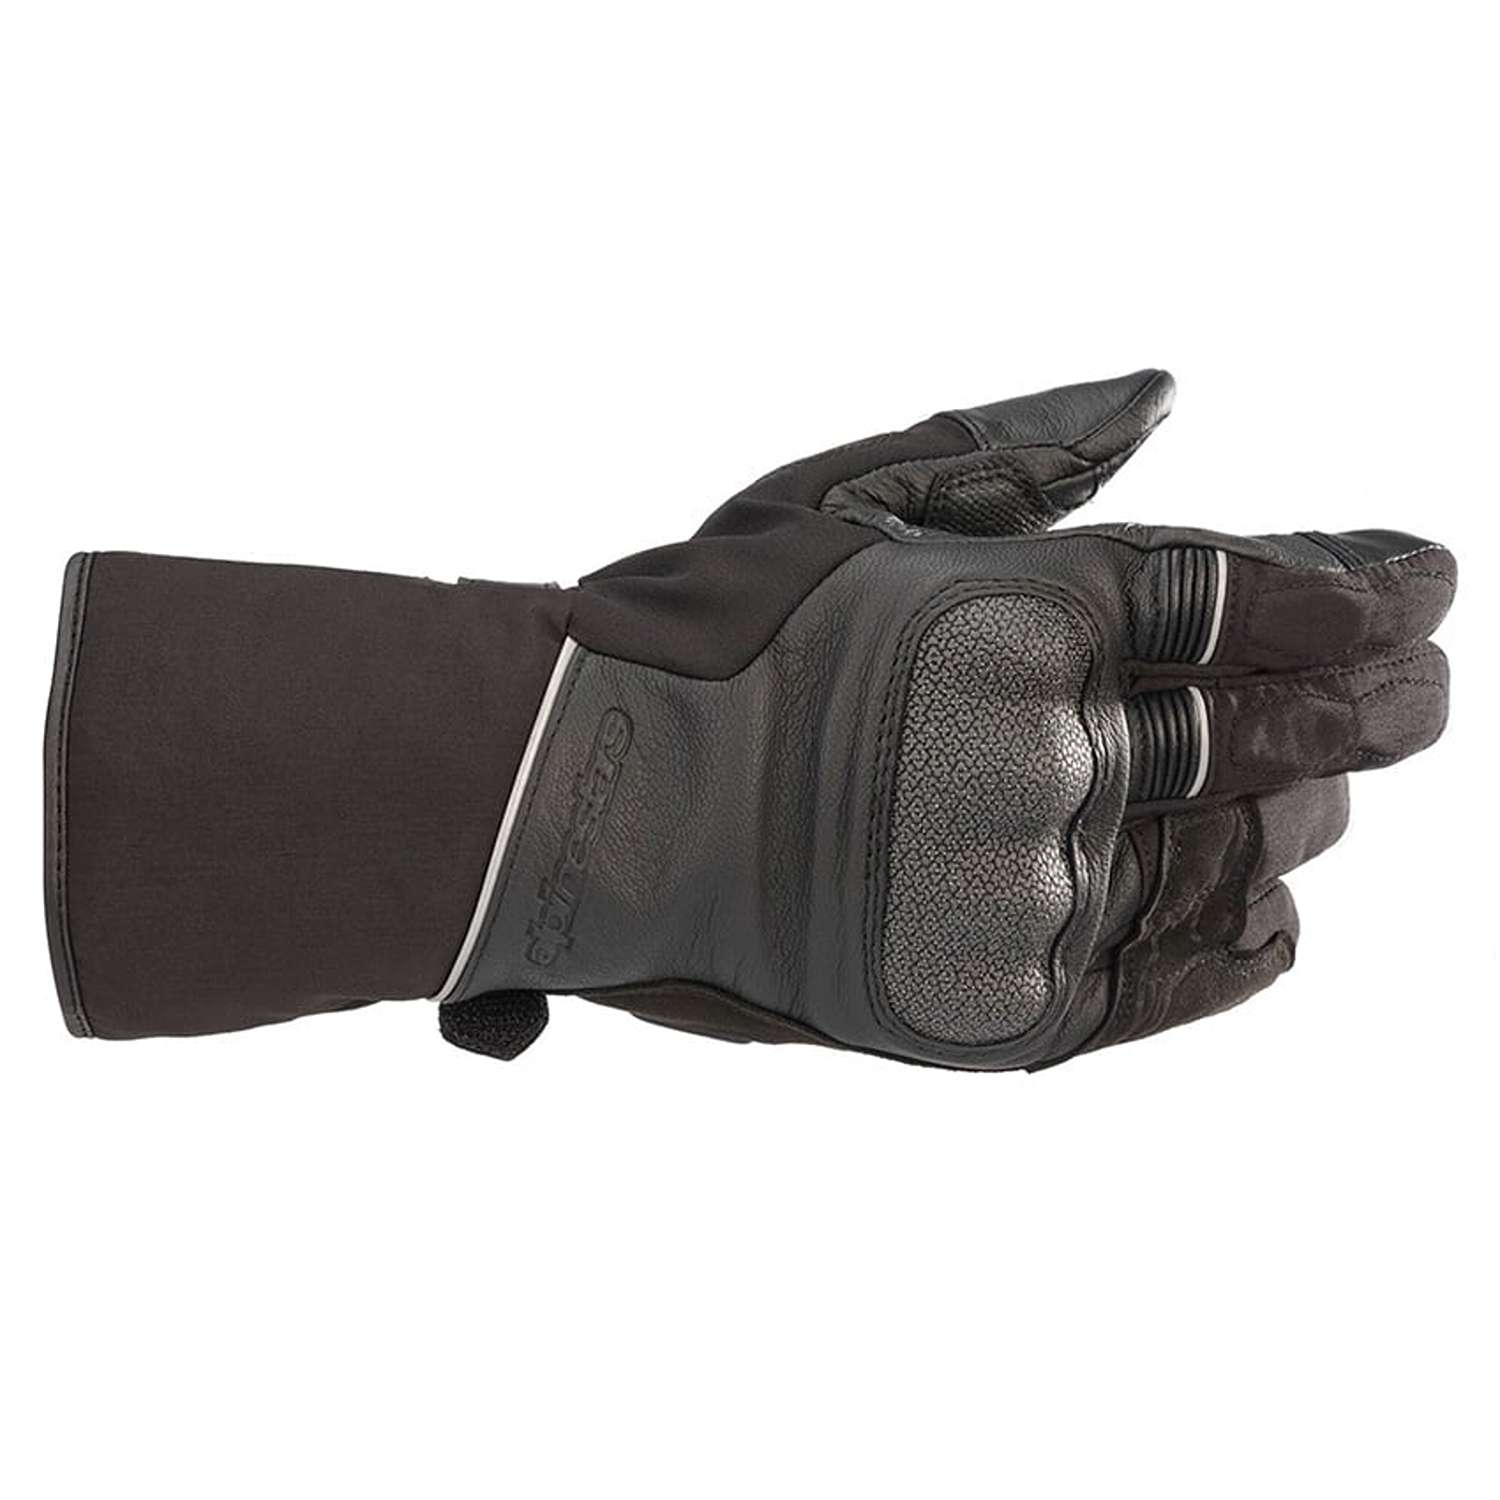 Image of Alpinestars Wr-2 V2 Gore-Tex Gloves With Gore Grip Technology Black Taille 2XL